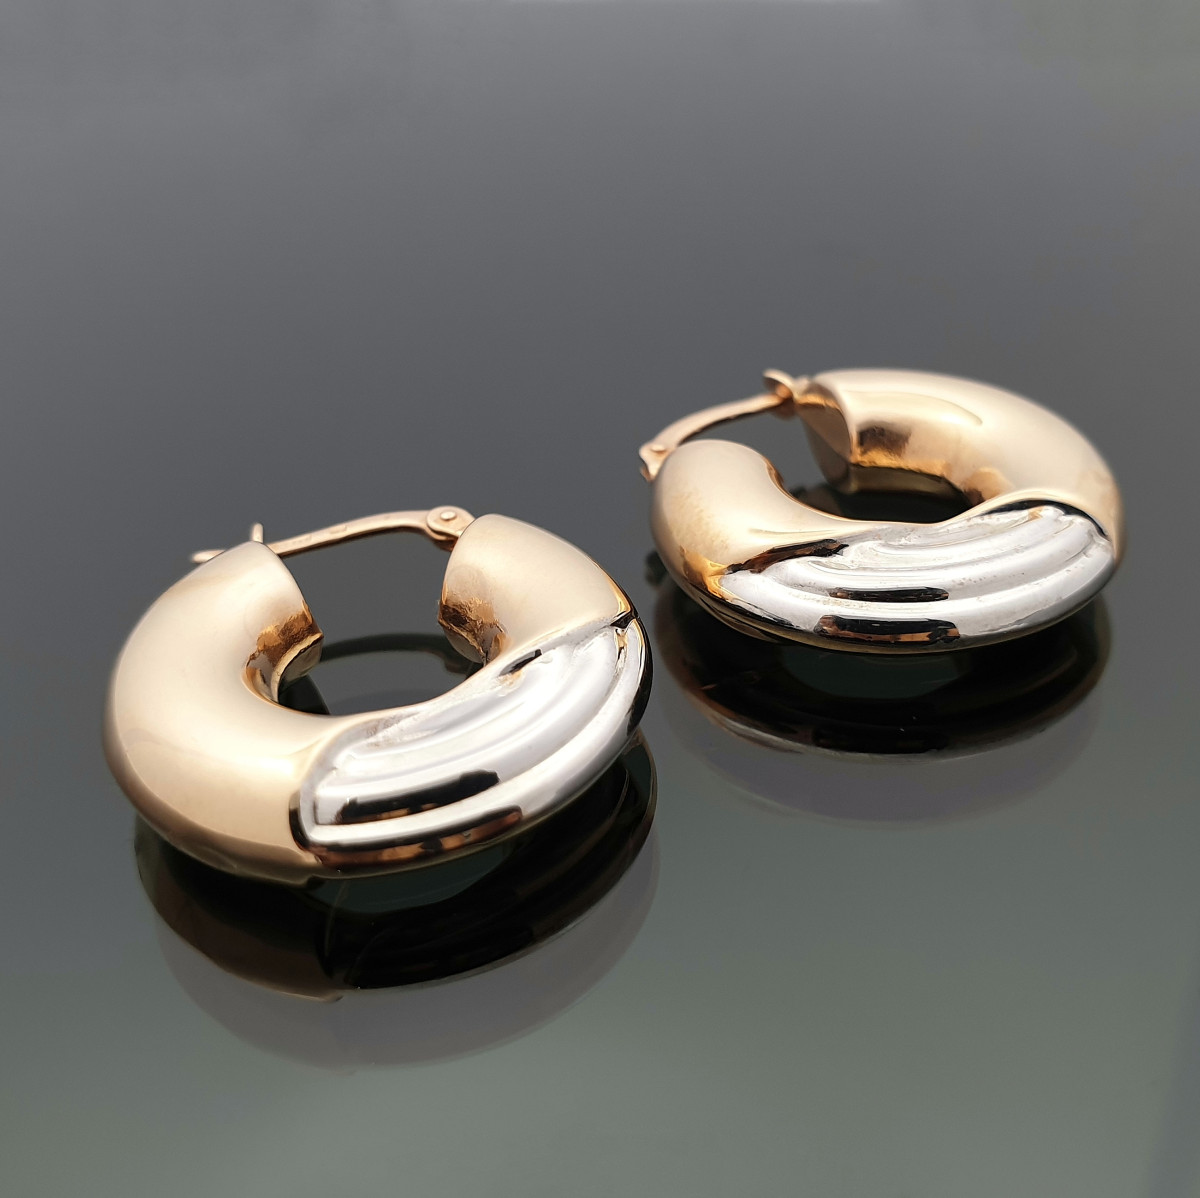  Round gold earrings (4)